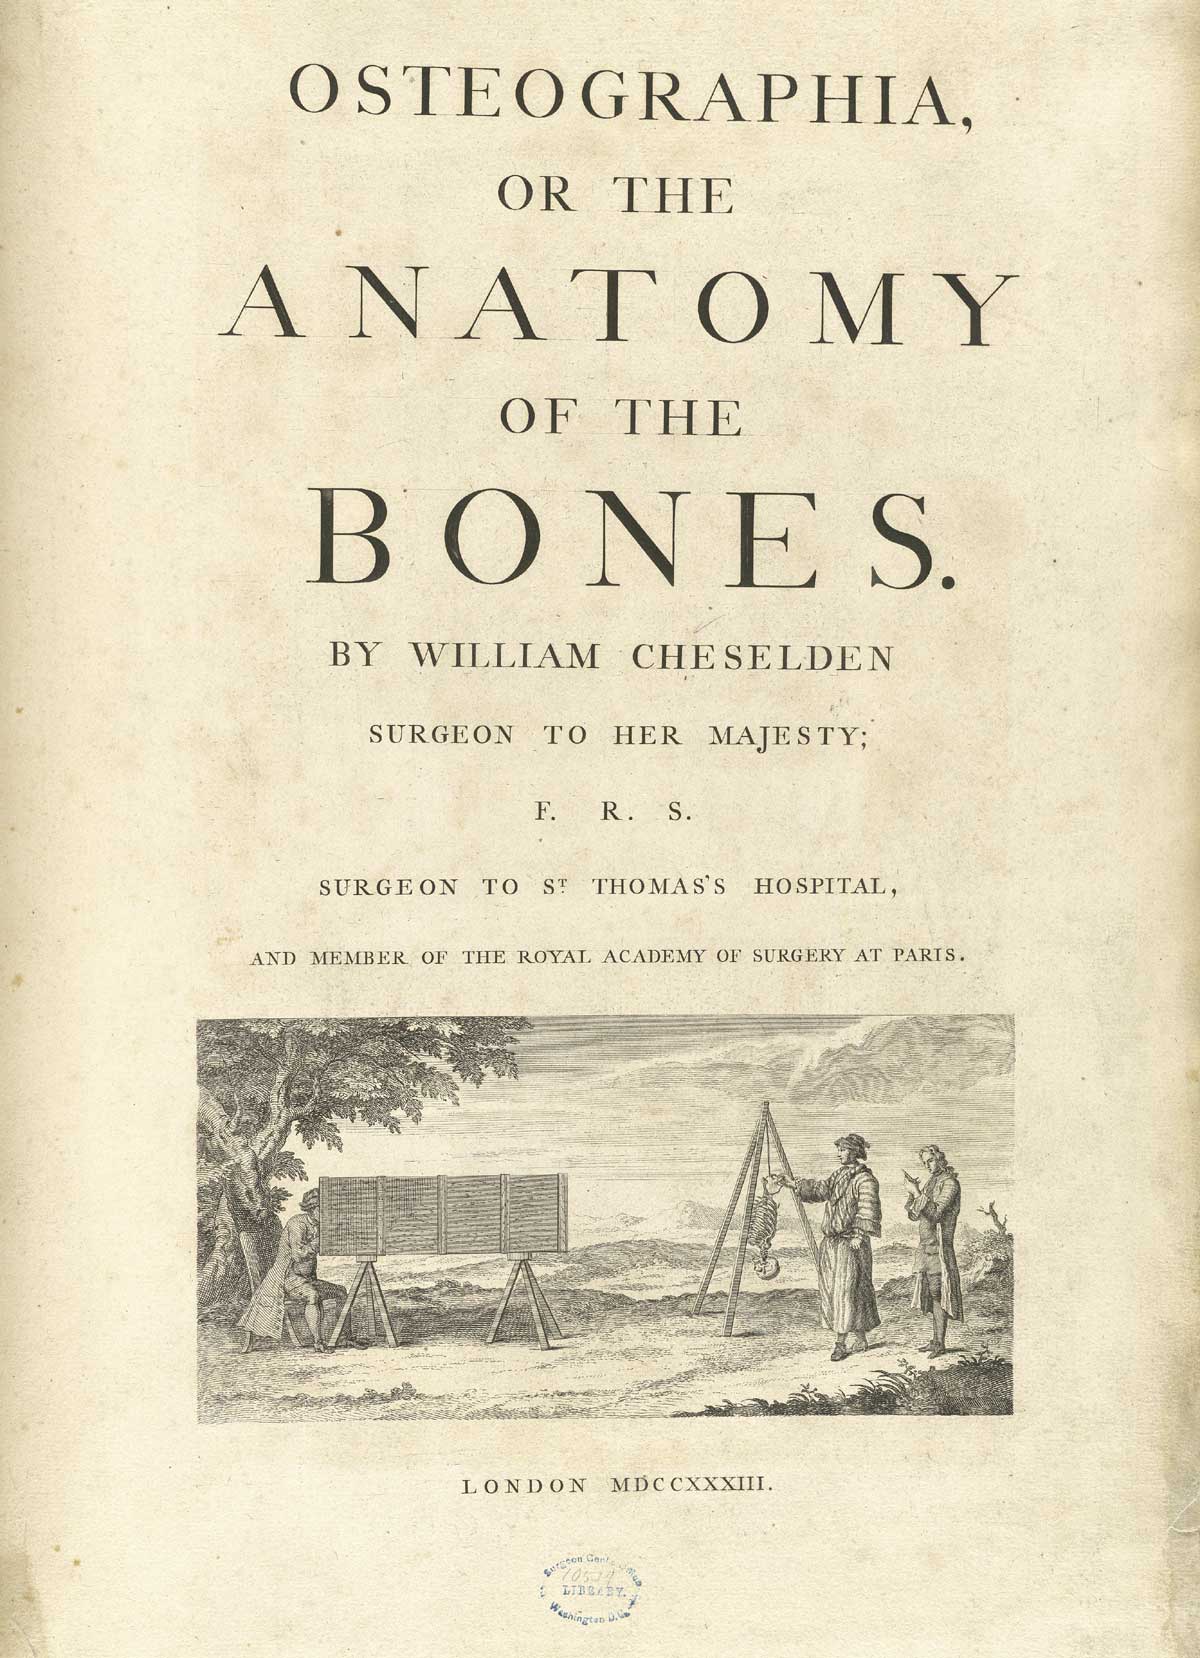 Typeset title page of William Cheselden’s Osteographia with an engraved vignette at the bottom of the image of two men at the right adjusting a skeleton hanging upside down from a tripod stand with a man on the left viewing it through a camera obscura; NLM Call no.: WZ 260 C499o 1733.